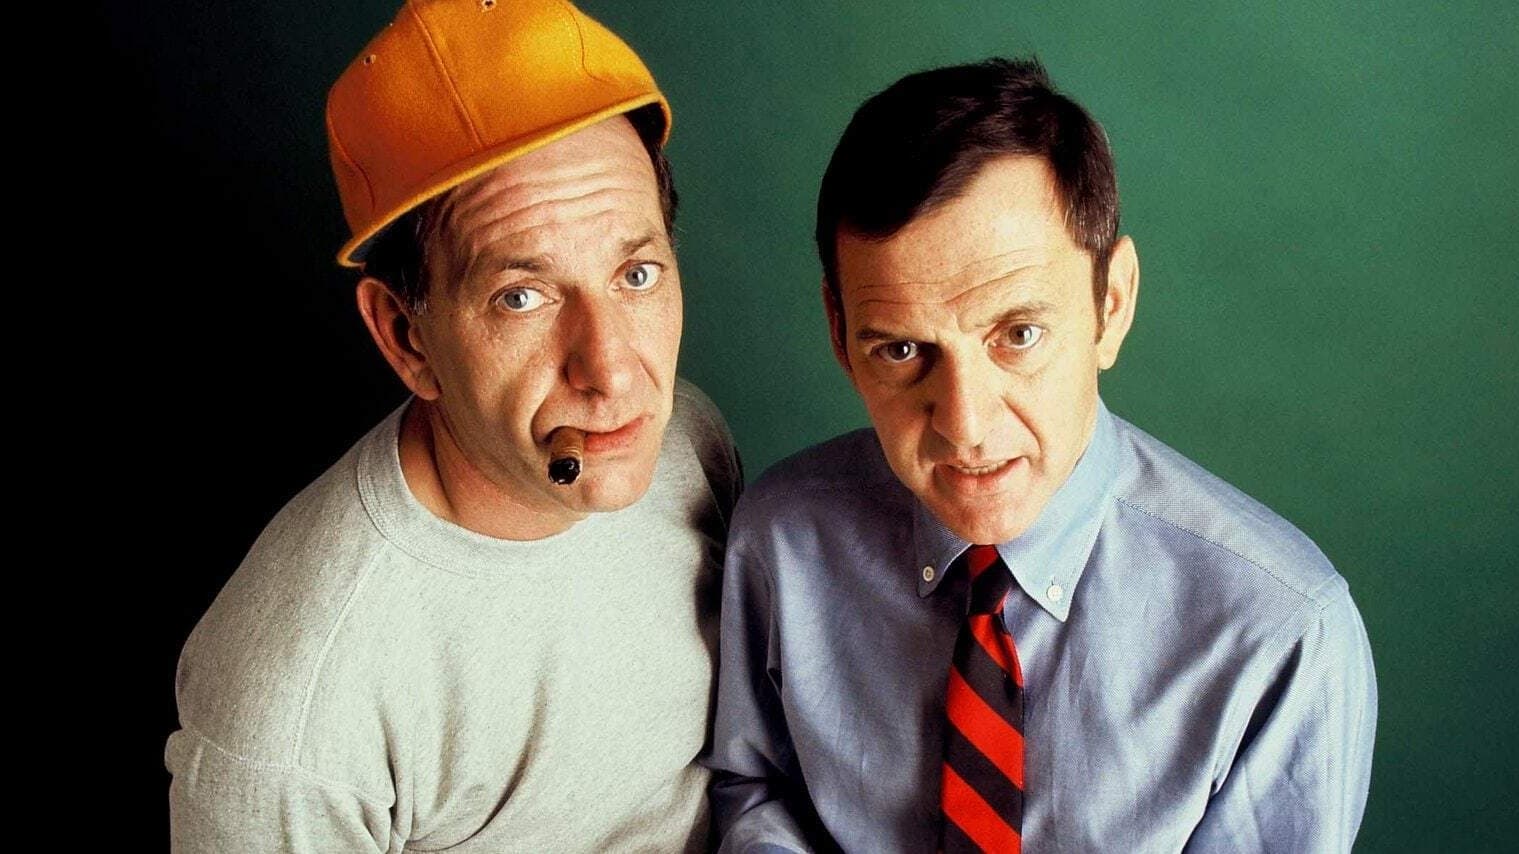 Watch The Odd Couple (1970) Online